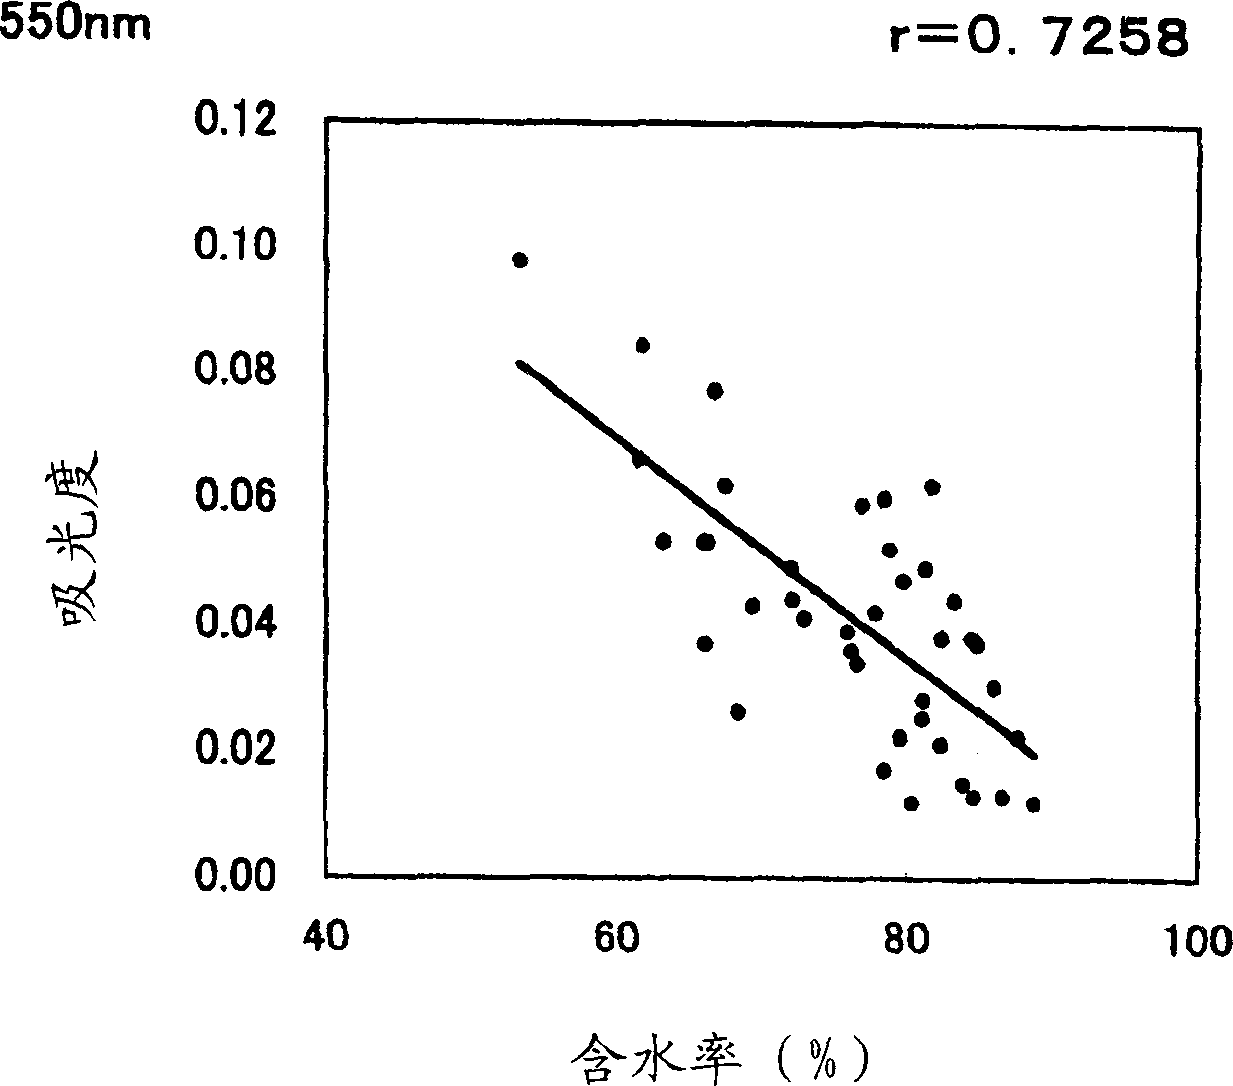 Method for examination of feces ocoult blood